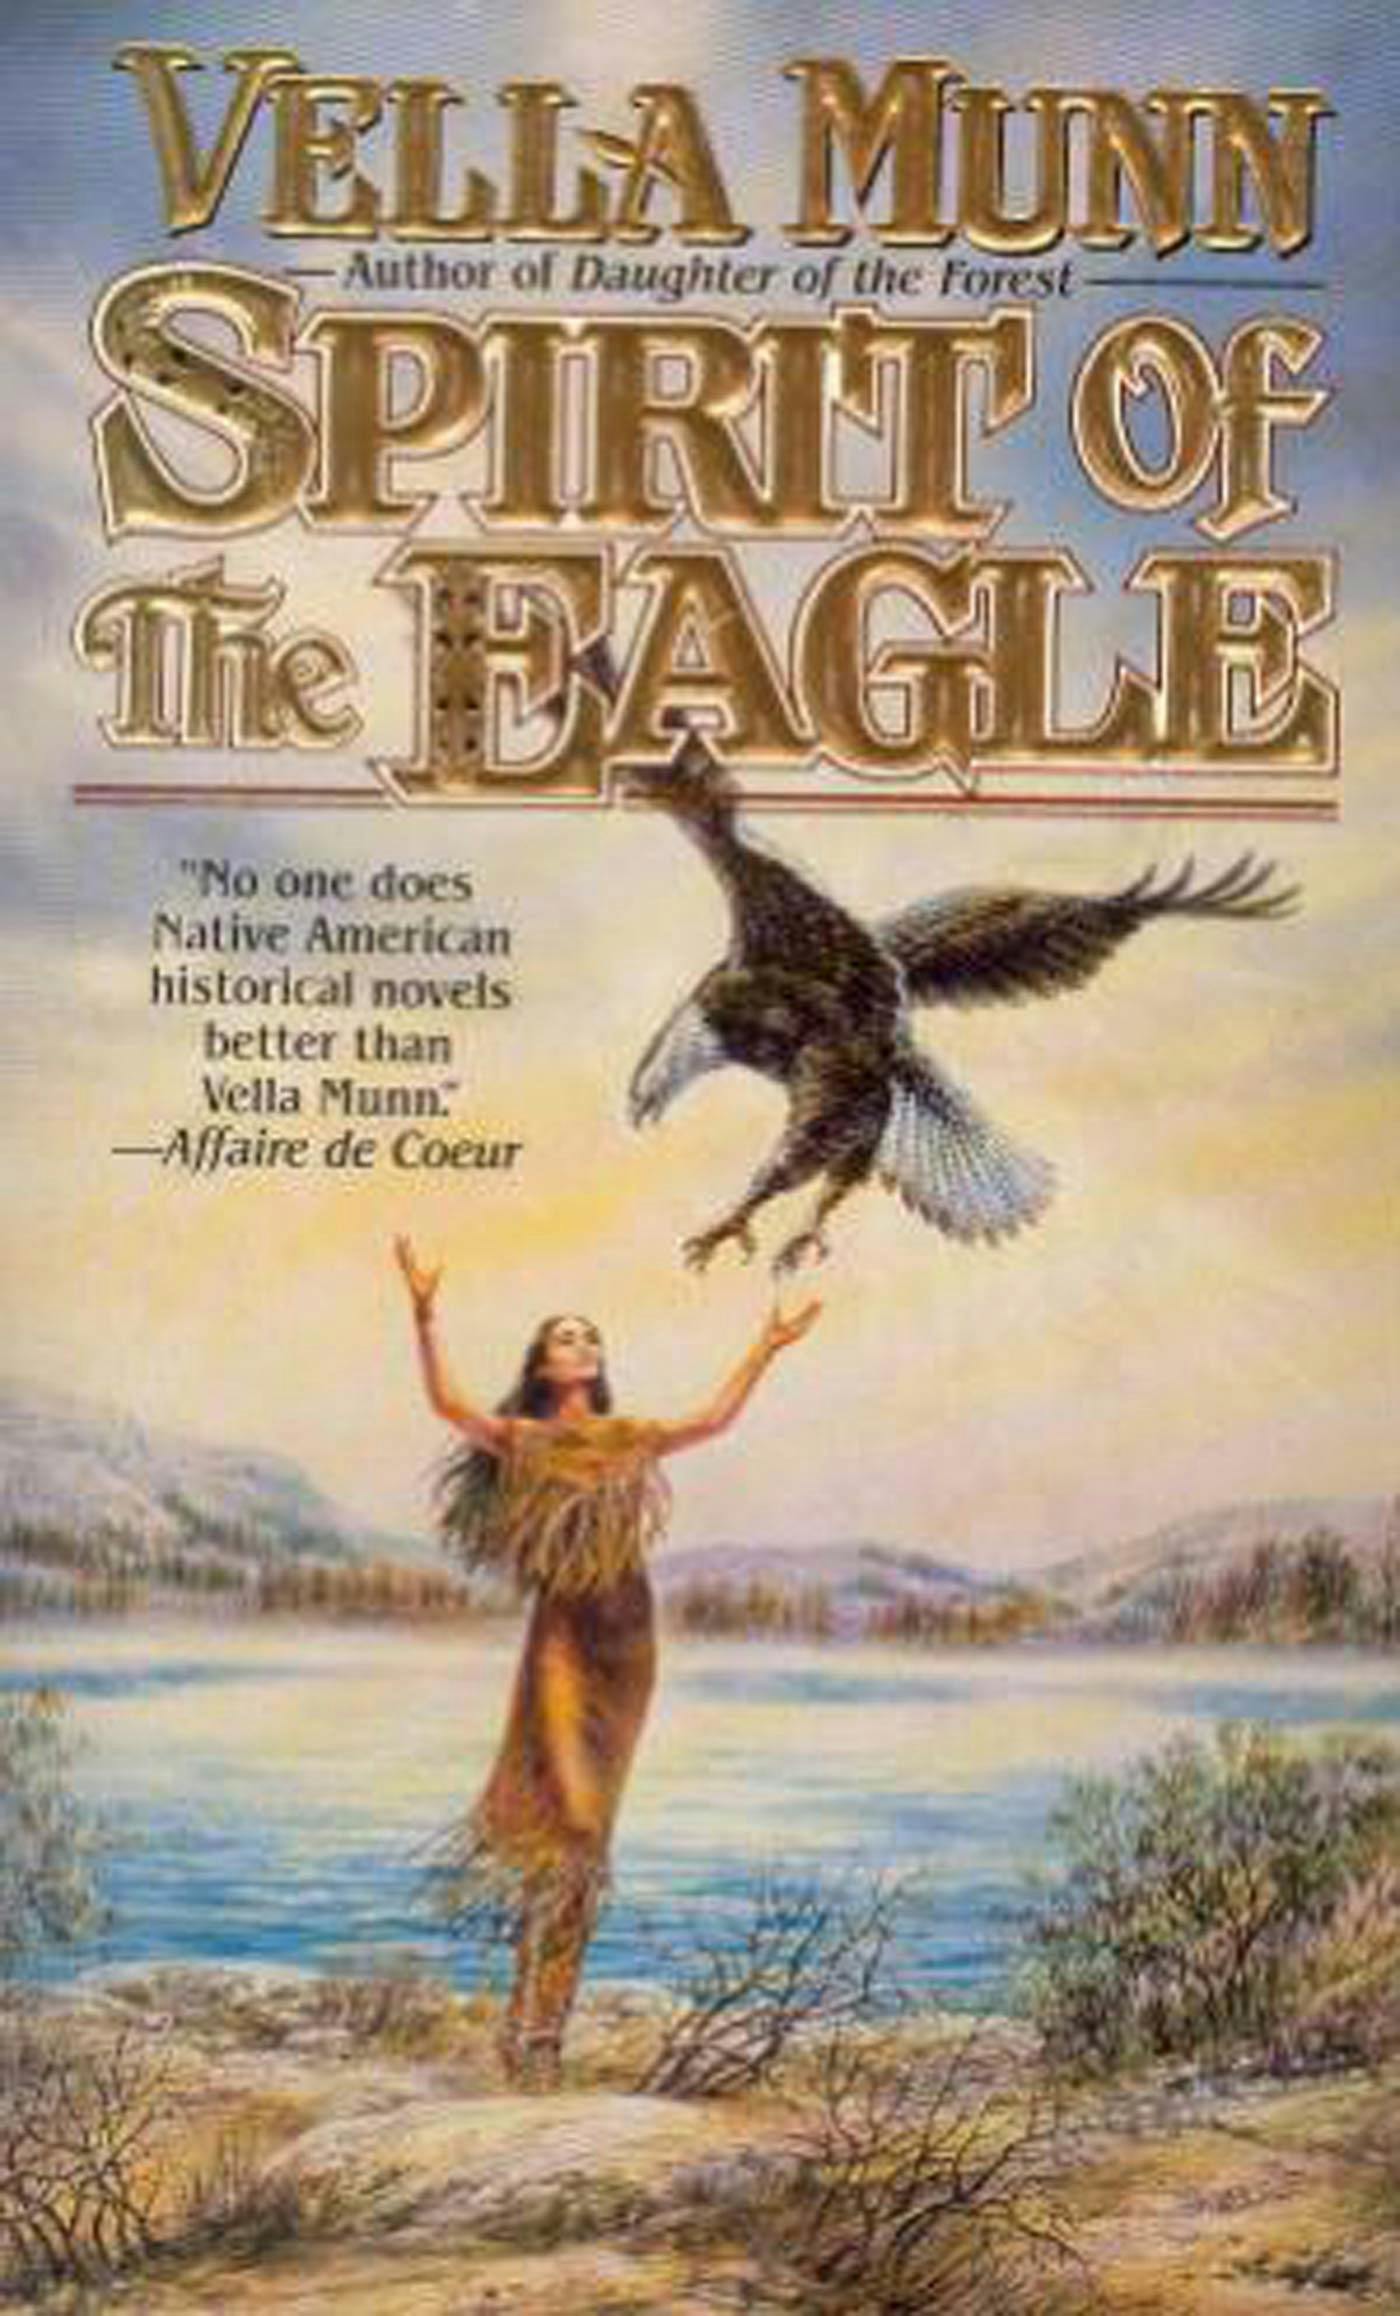 Cover for the book titled as: Spirit of the Eagle